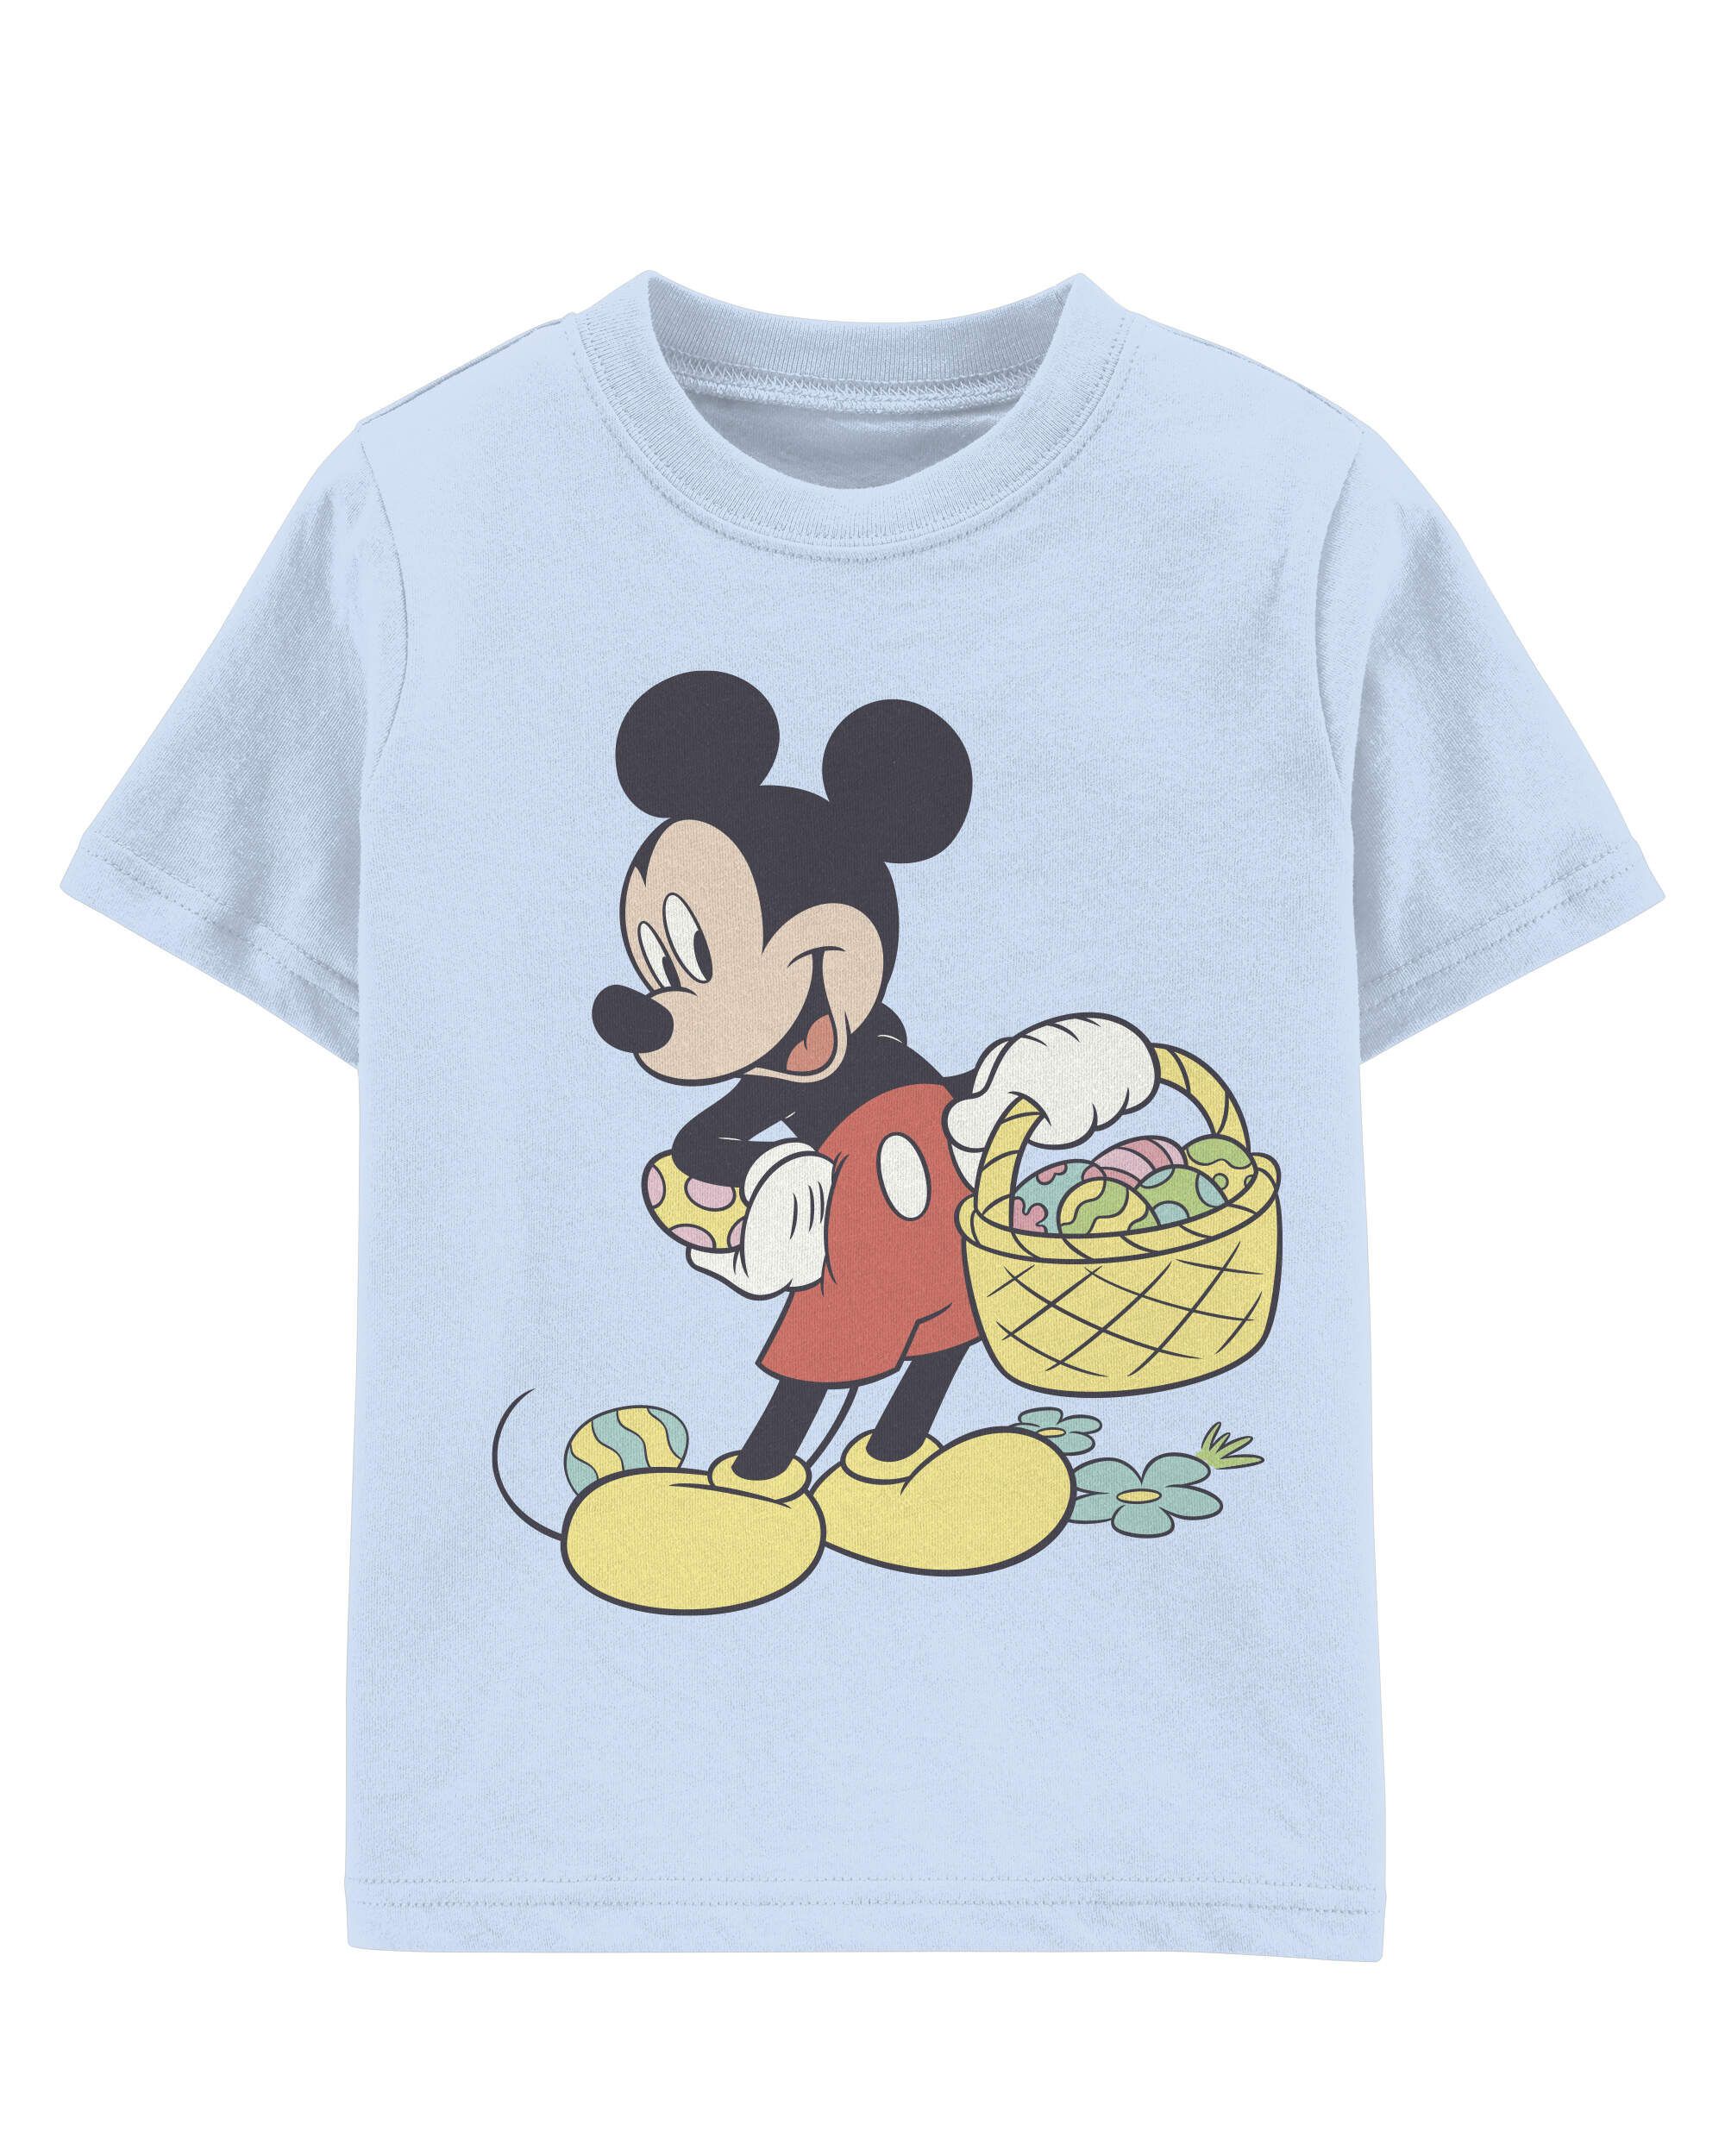 Blue Toddler Mickey Mouse Tee | carters.com | Carter's